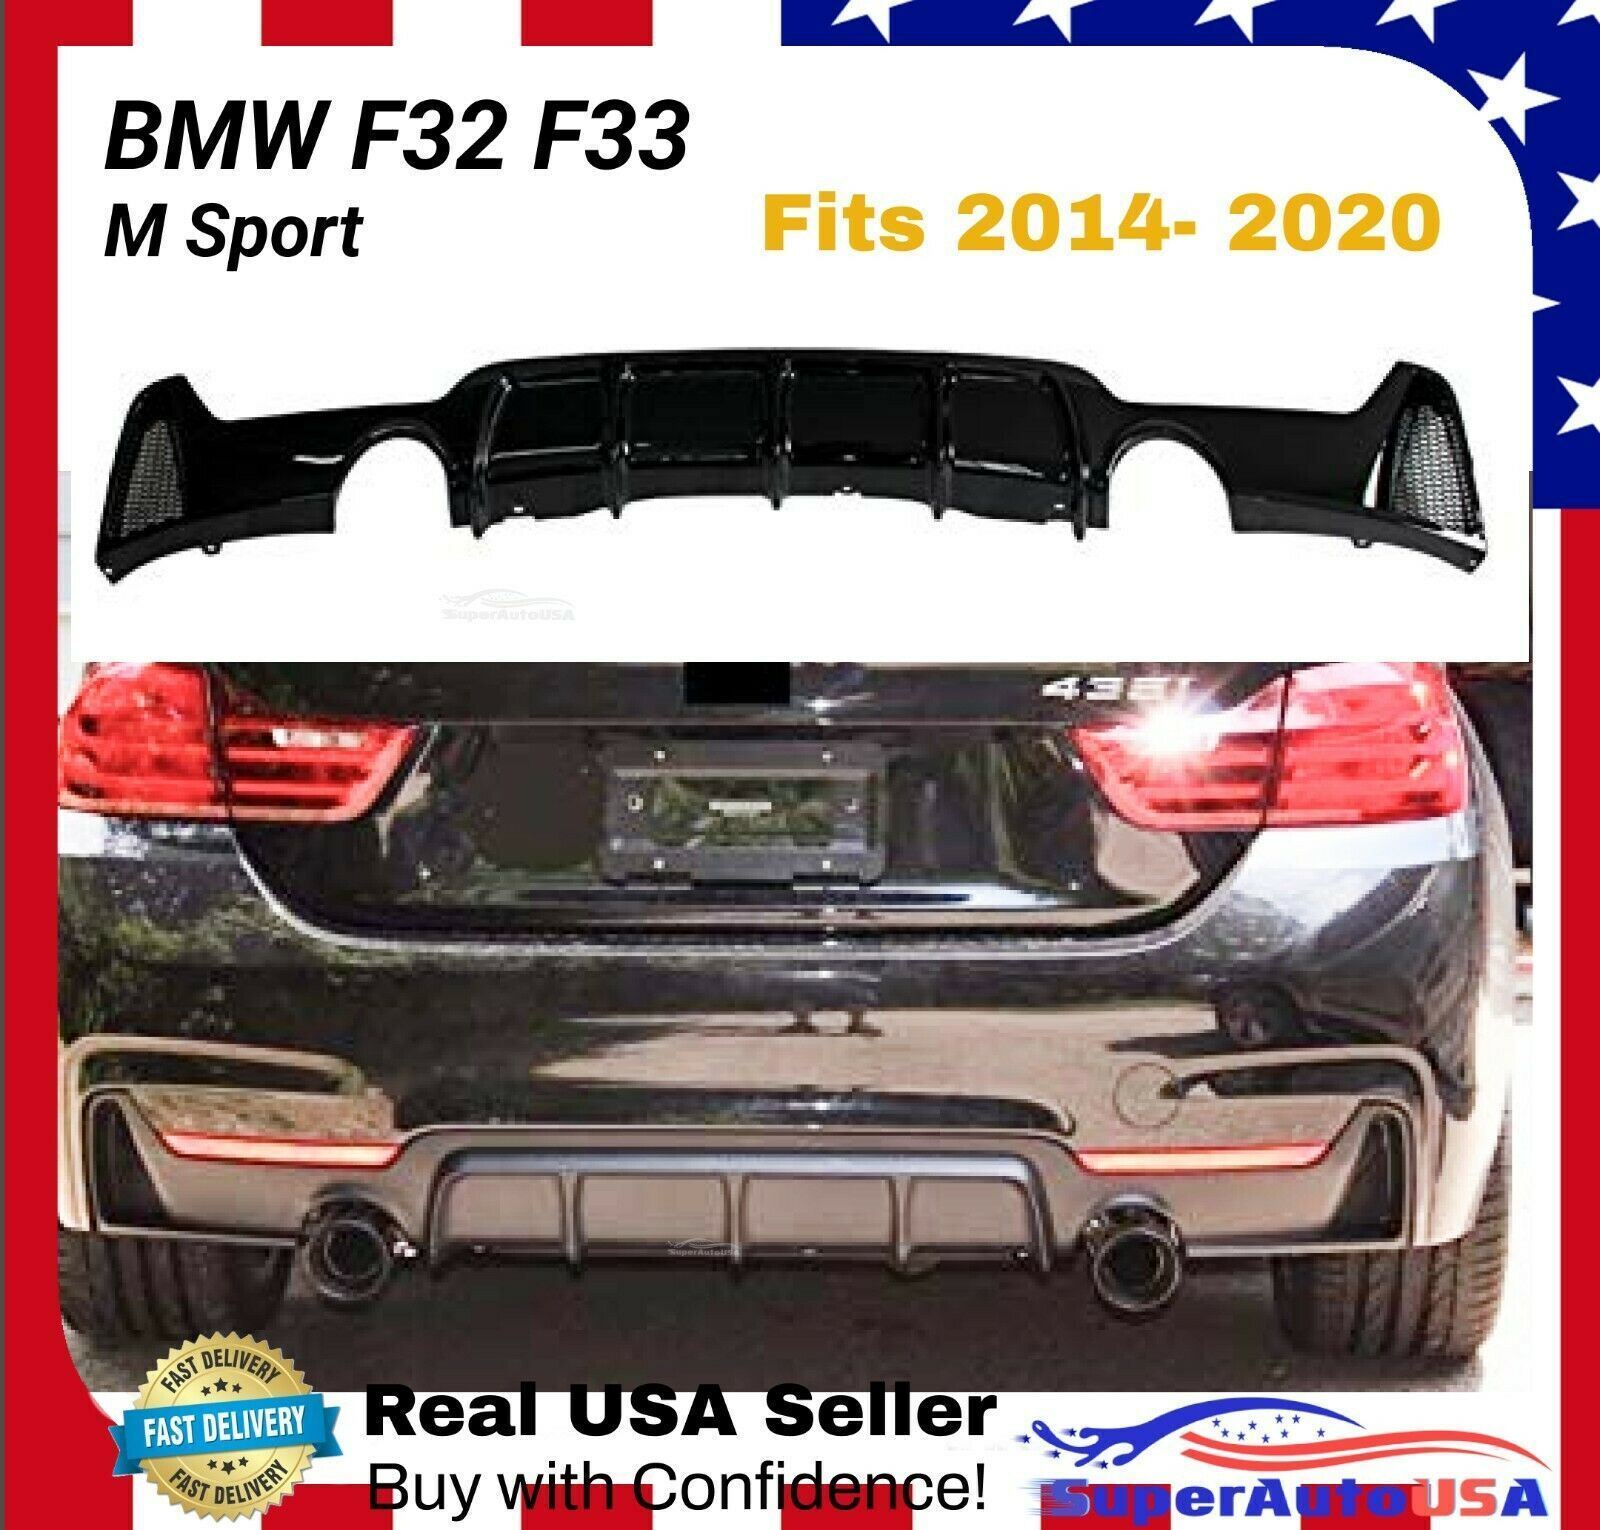 For 2014-2020 F32 BMW 435i 440i xDrive M Sport Rear Bumper Diffuser Duo Outlet